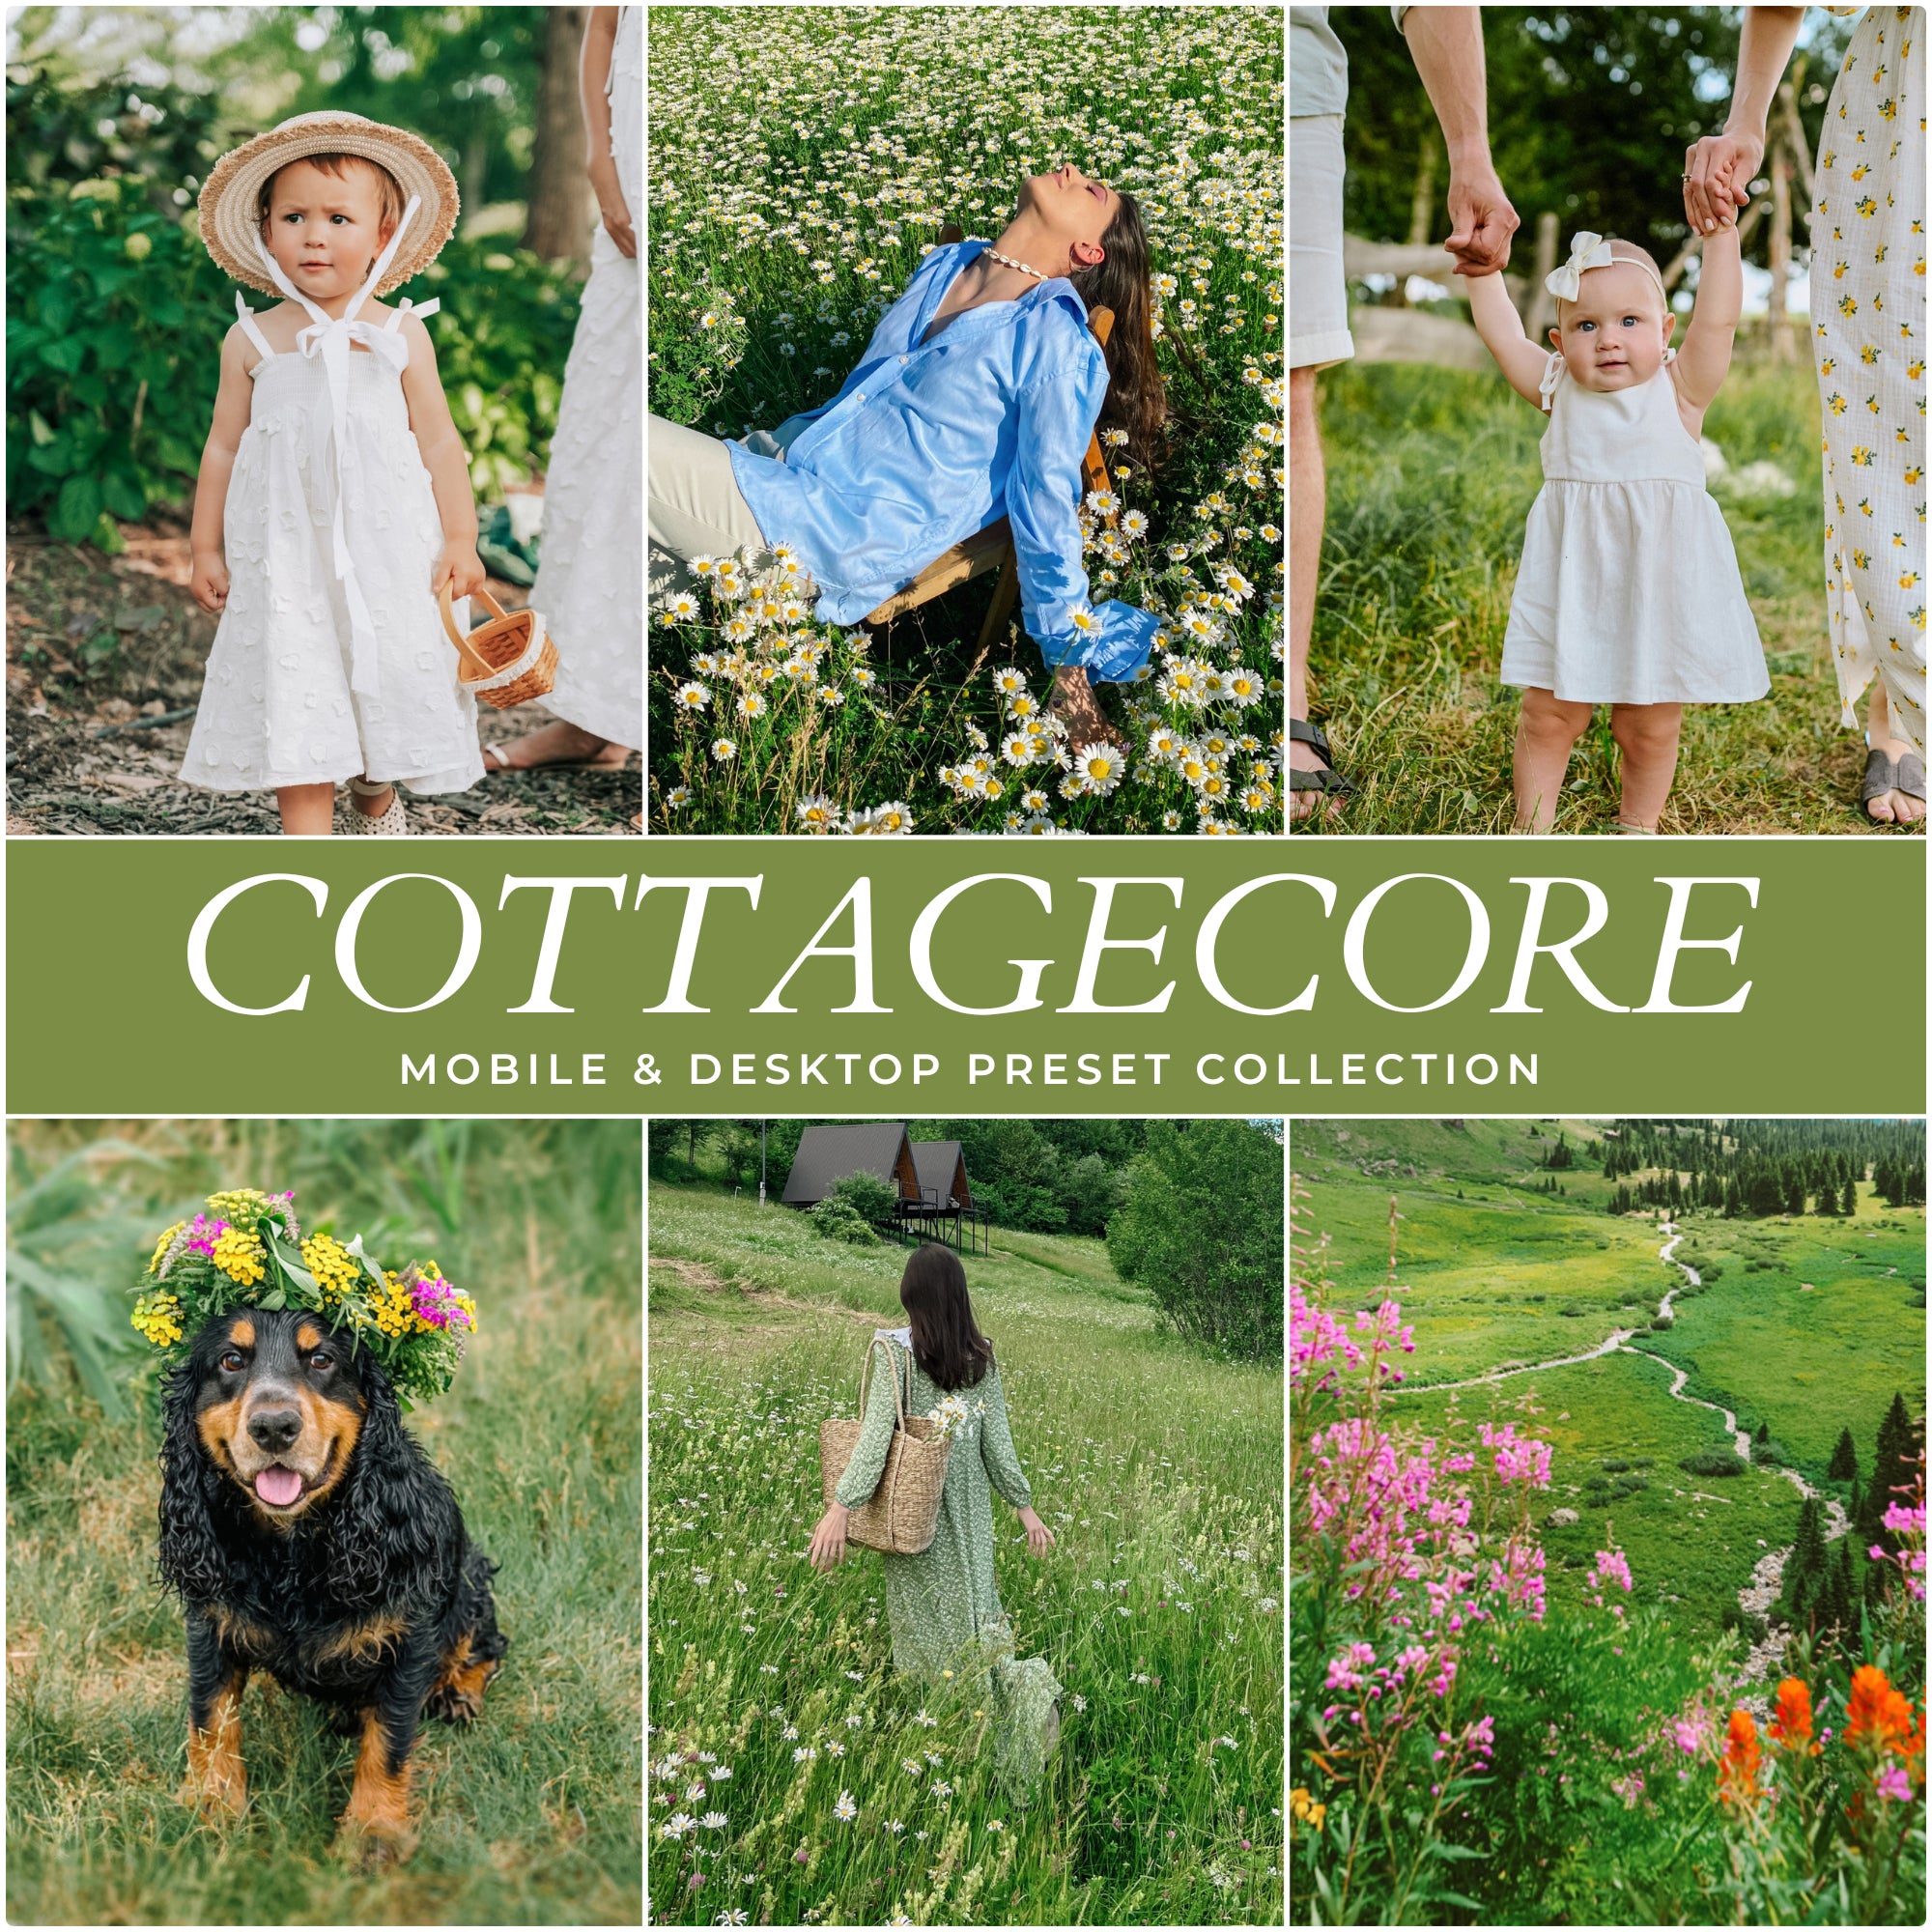 Cottagecore Aesthetic Lightroom Presets The Best Instagram Influencer and Blogger Presets by Lou And marks Presets